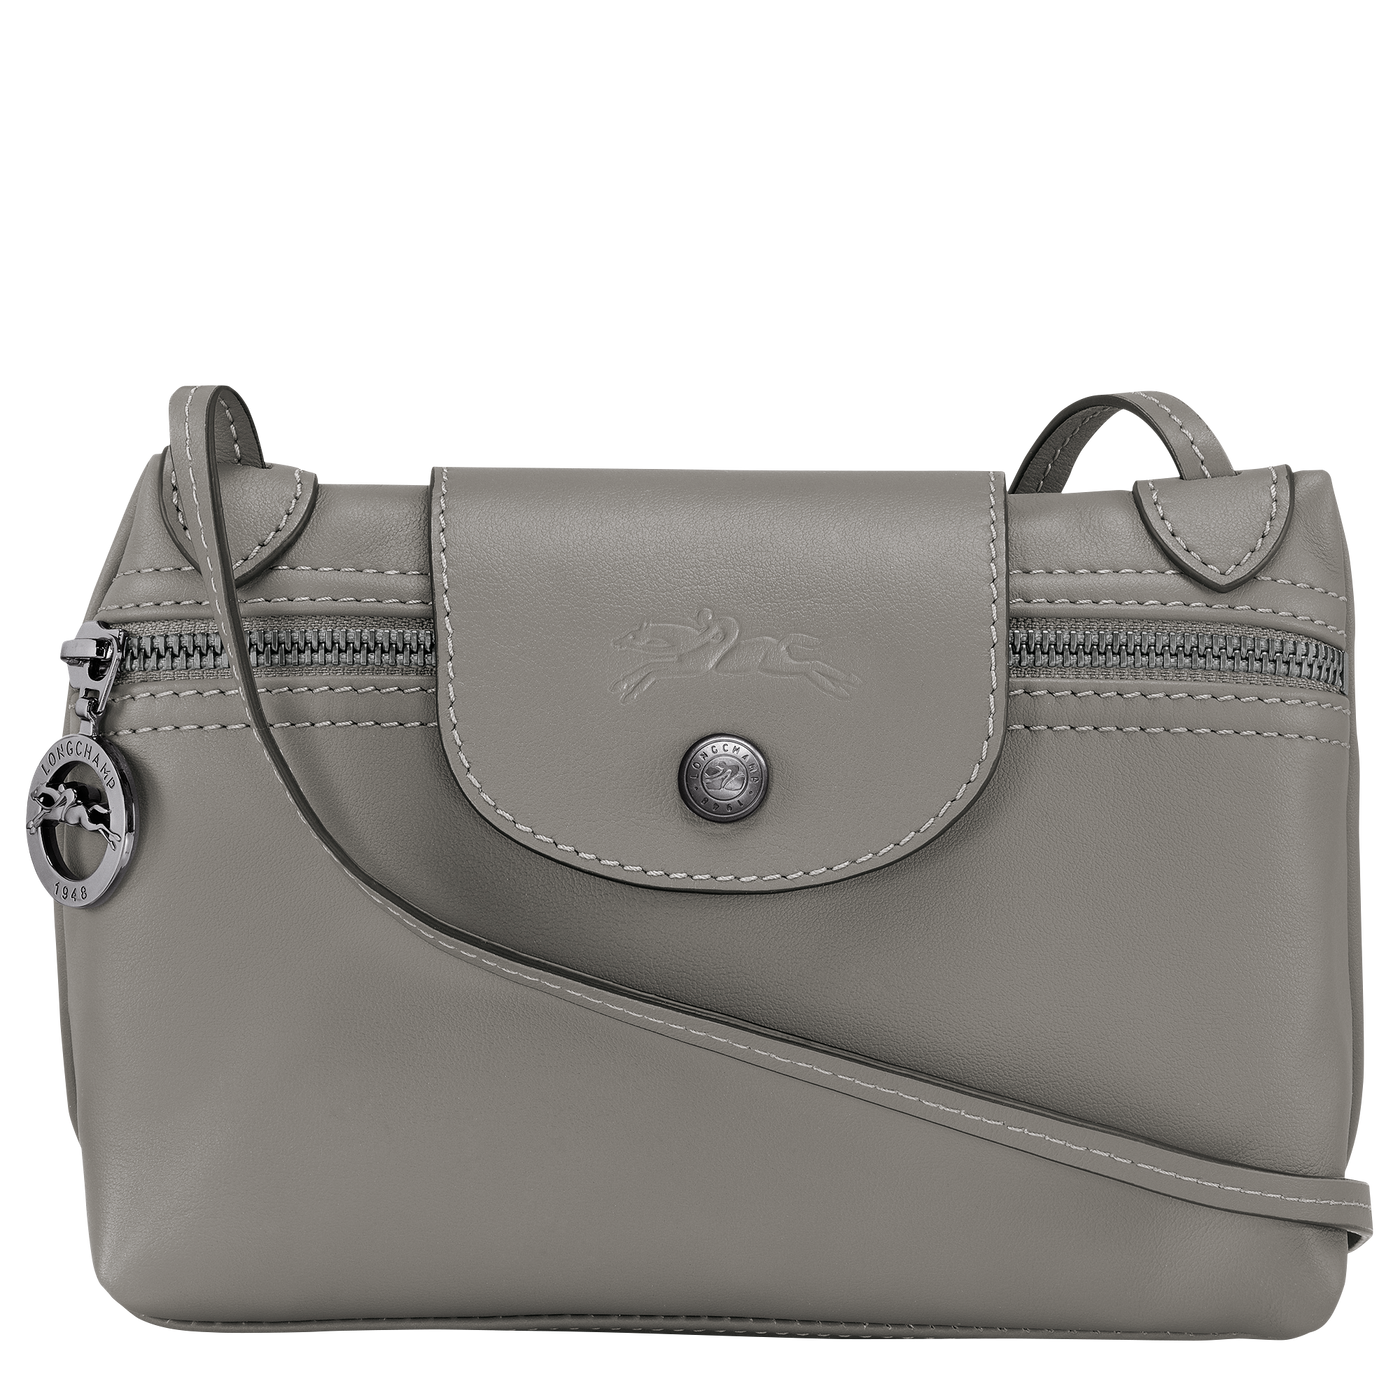 Shop The Latest Collection Of Longchamp Le Pliage Xtra Crossbody Bag - 10188987 In Lebanon